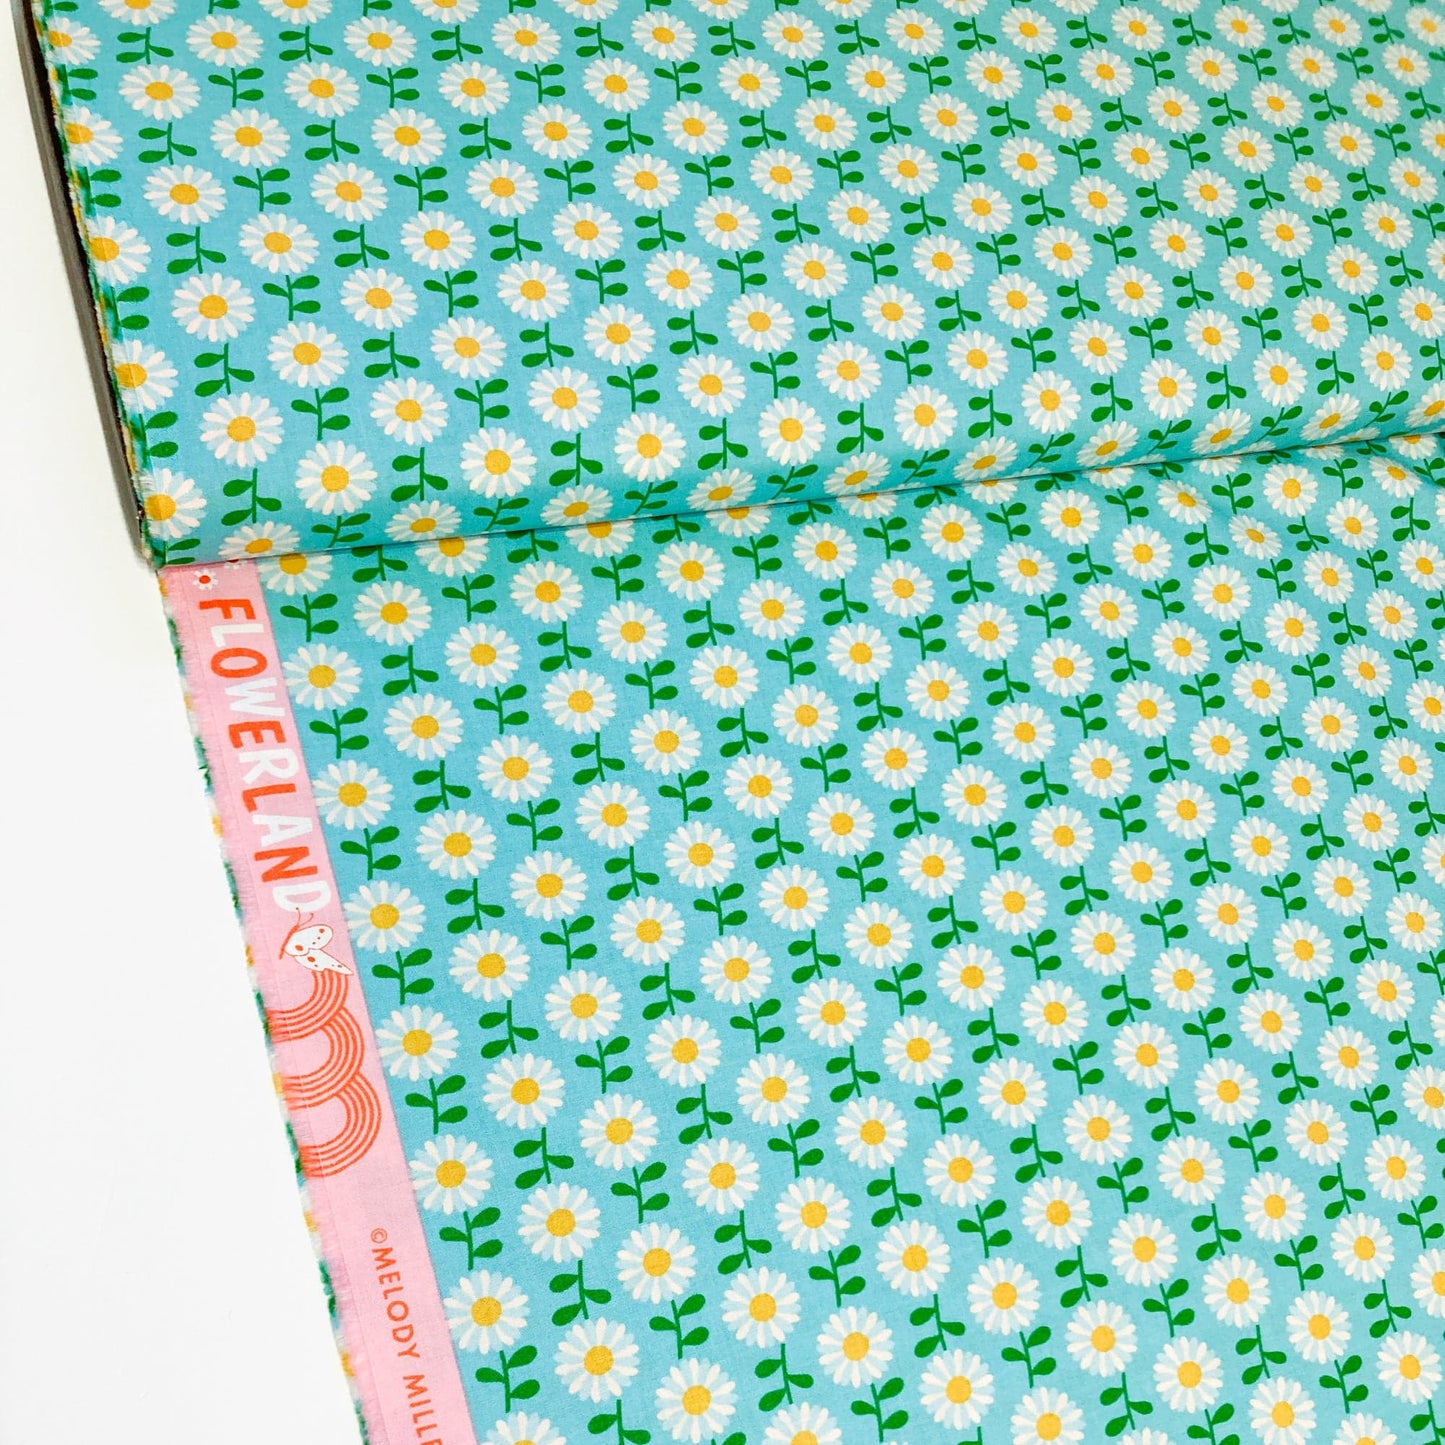 Ruby Star Society 'Flowerland' Quilting Cotton 'Field of Flowers' in Turquoise